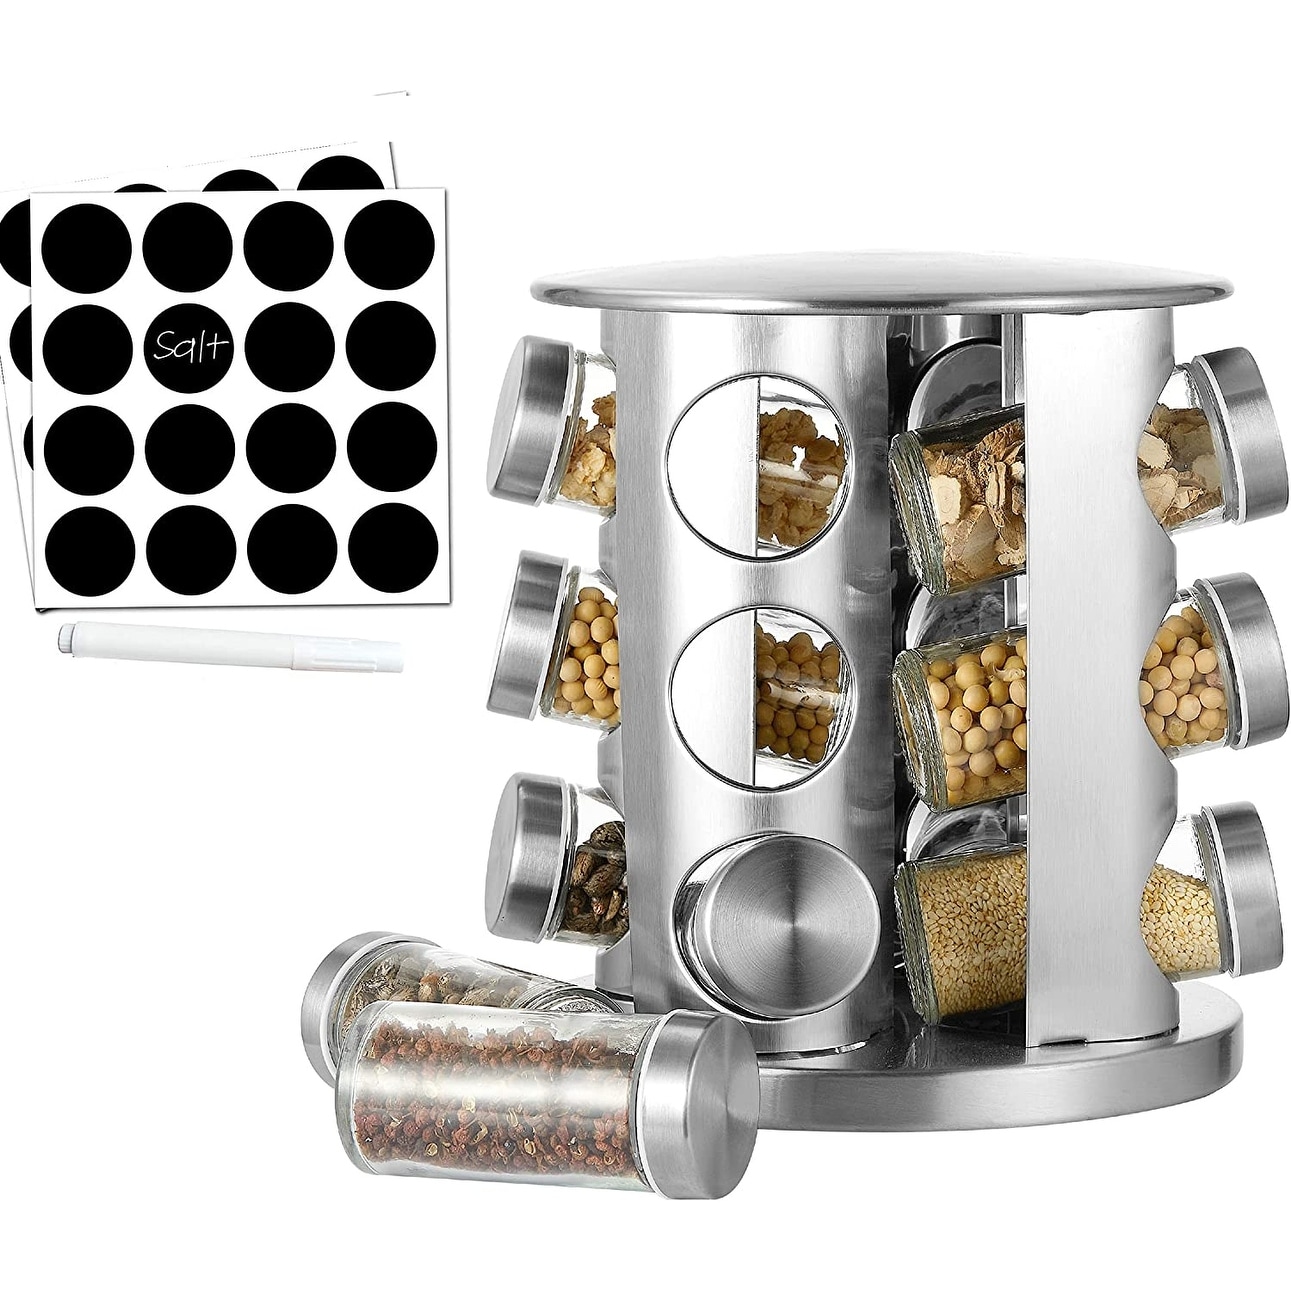 https://ak1.ostkcdn.com/images/products/is/images/direct/2c13e7dd04257709e595f8dd9af9a17afa763618/Cheer-Collection-Rotating-Spice-Rack-with-12-Jars.jpg